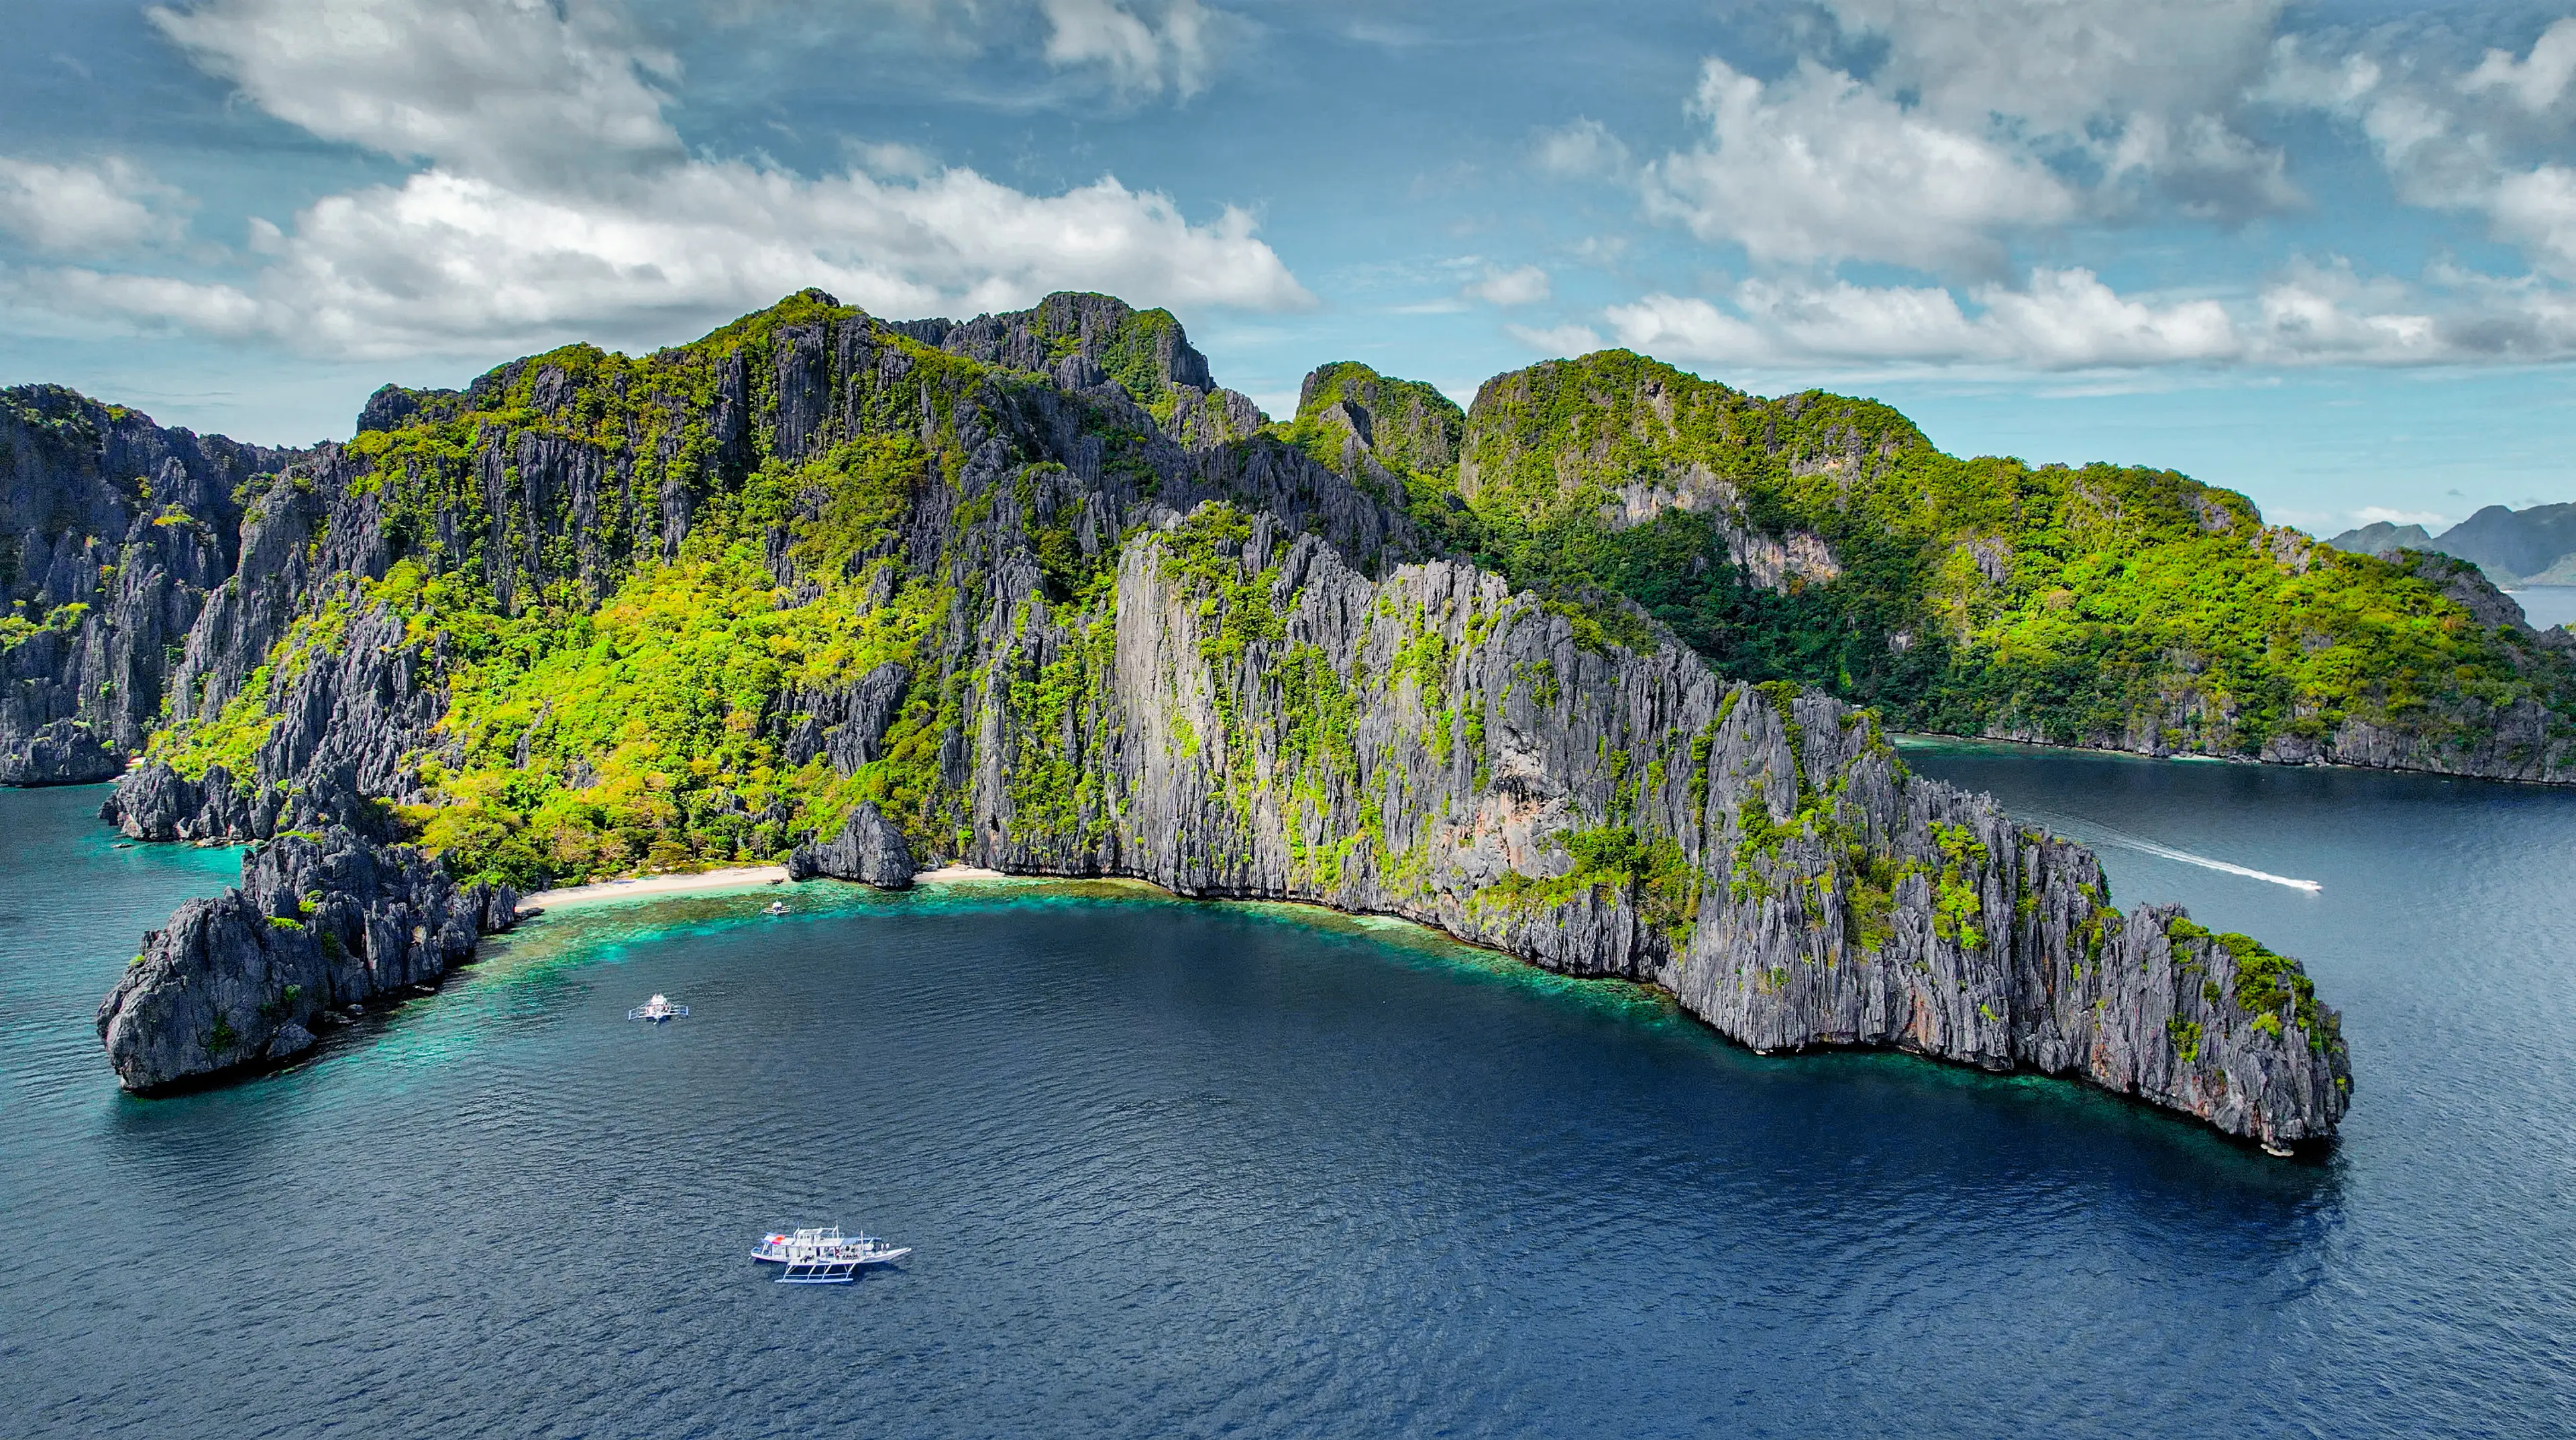 2-Day Palawan Excursion: Food, Wine & Sightseeing with Friends